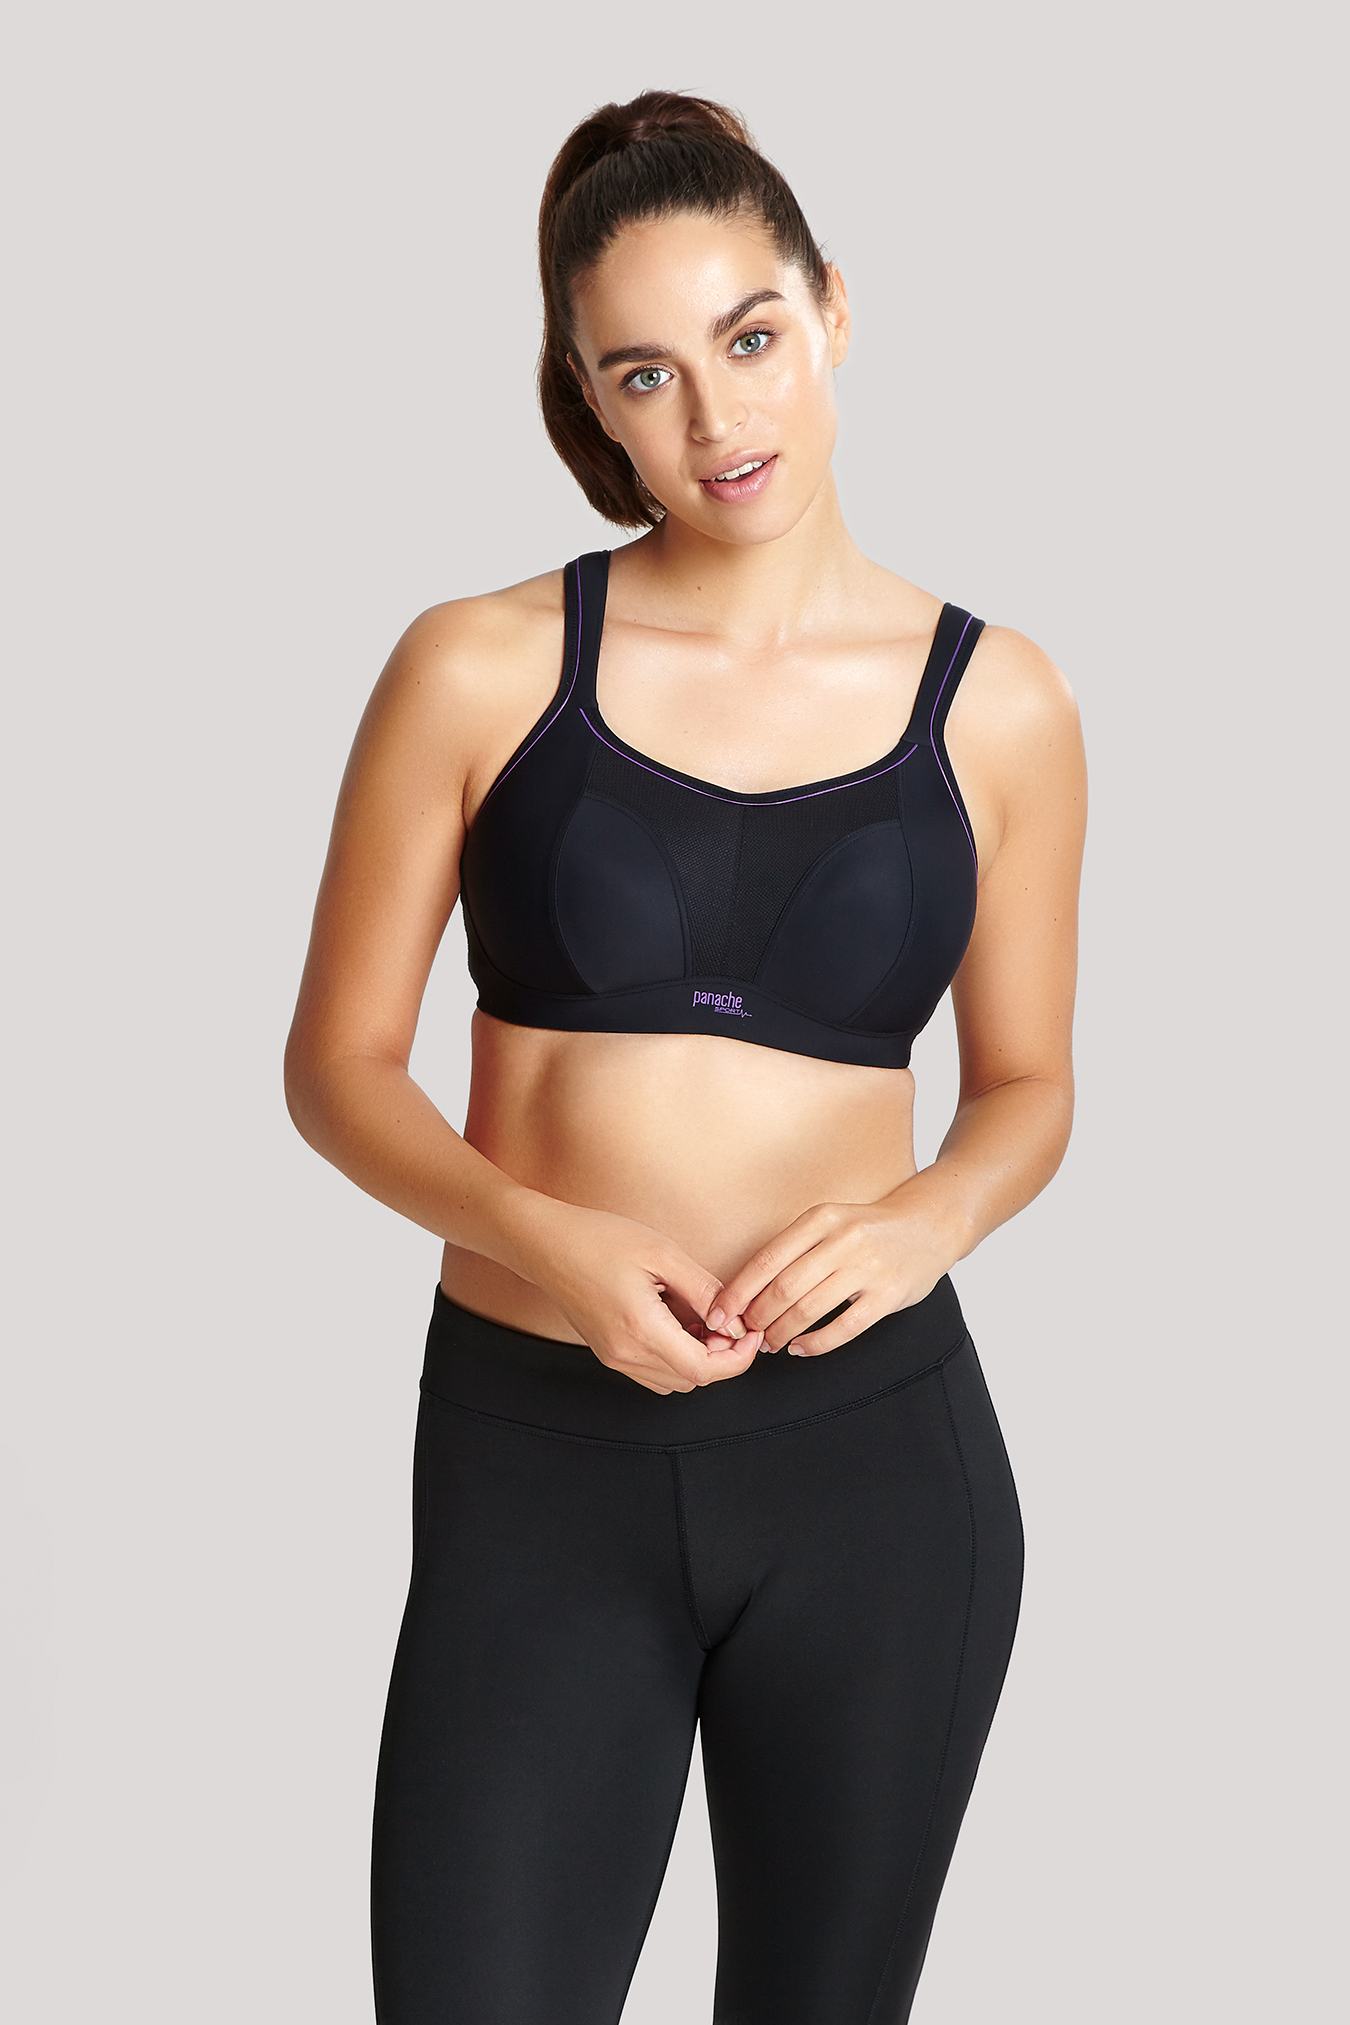 Panache Sports Moulded Underwired Bra Review